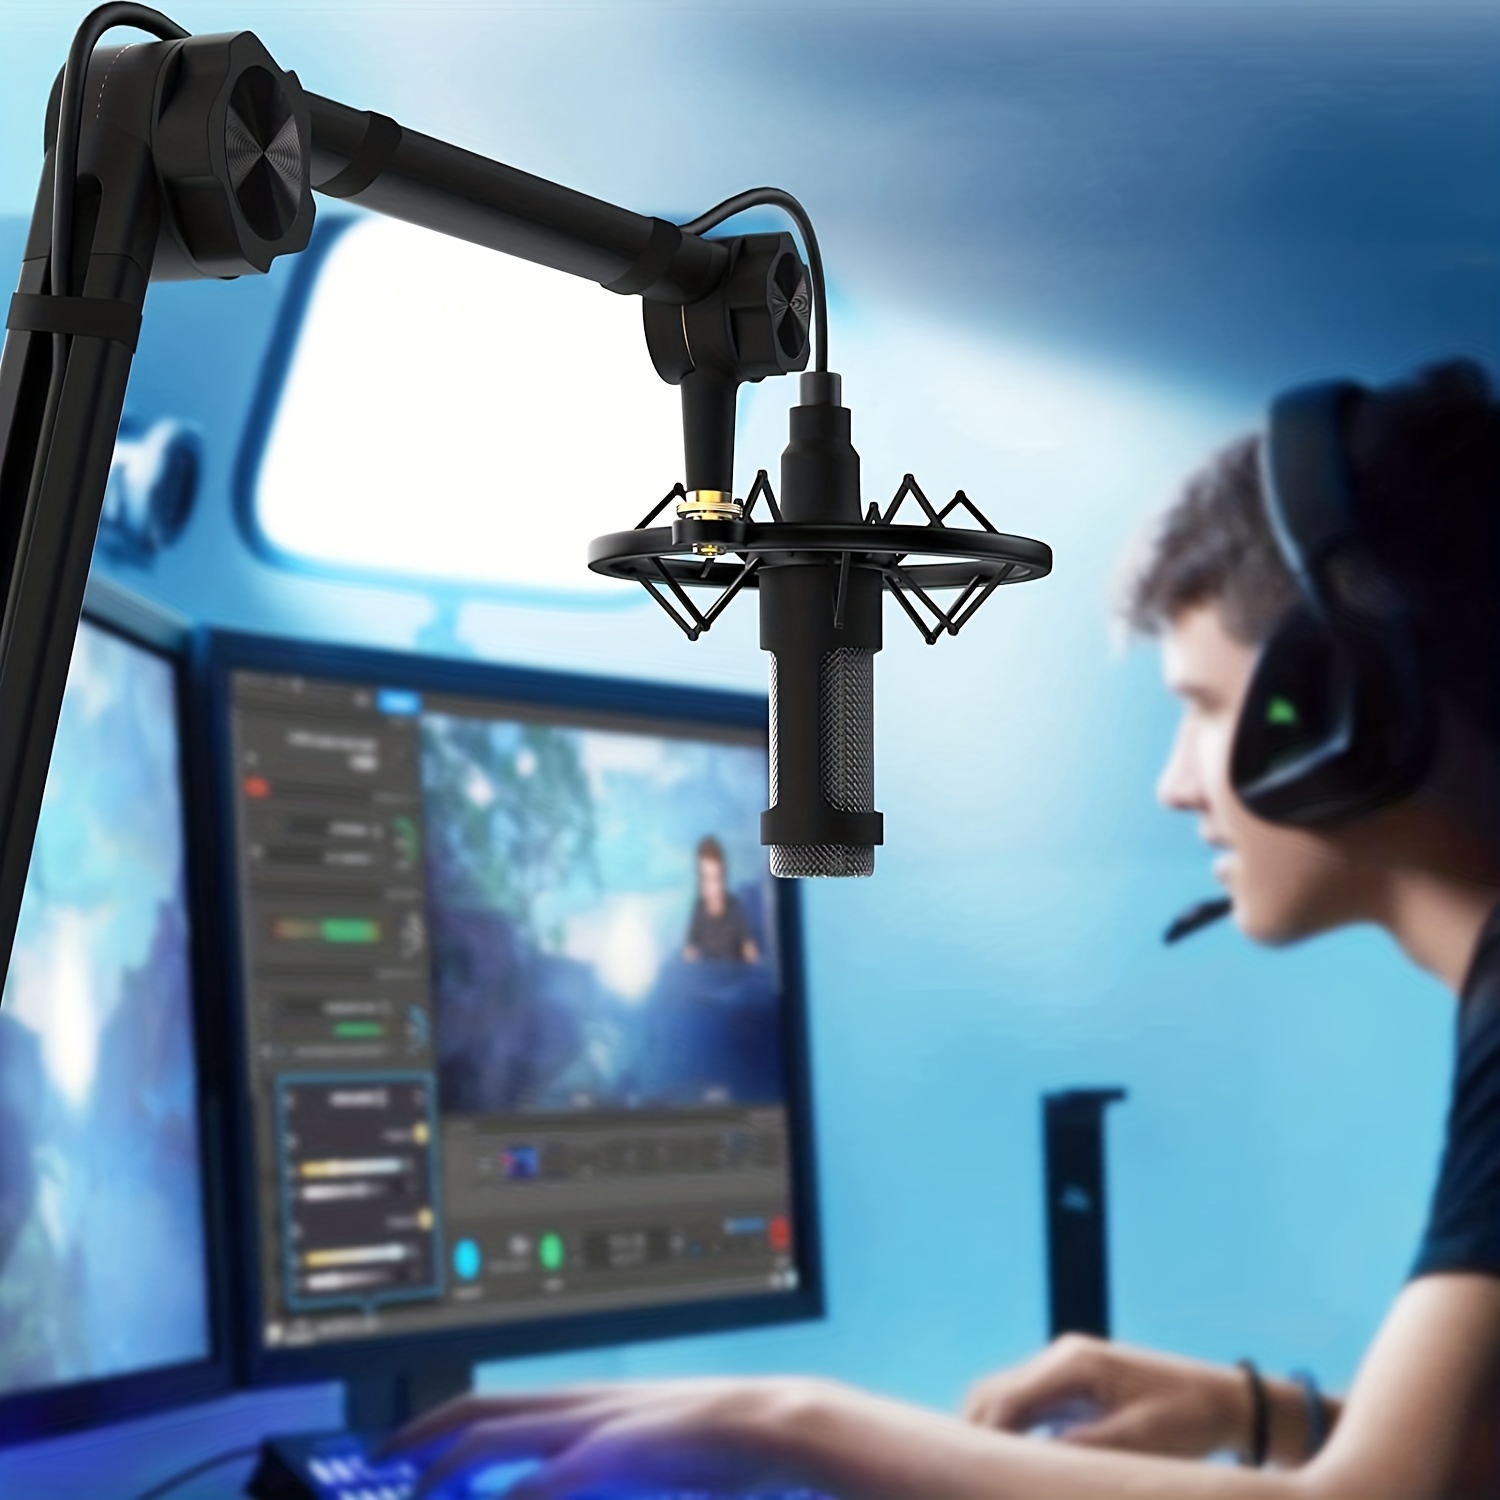 IXTECH Microphone Boom Arm with Desk Mount, 360° Rotatable, Adjustable and  Foldable Scissor Mounting for Podcast, Video Gaming, Radio and Studio